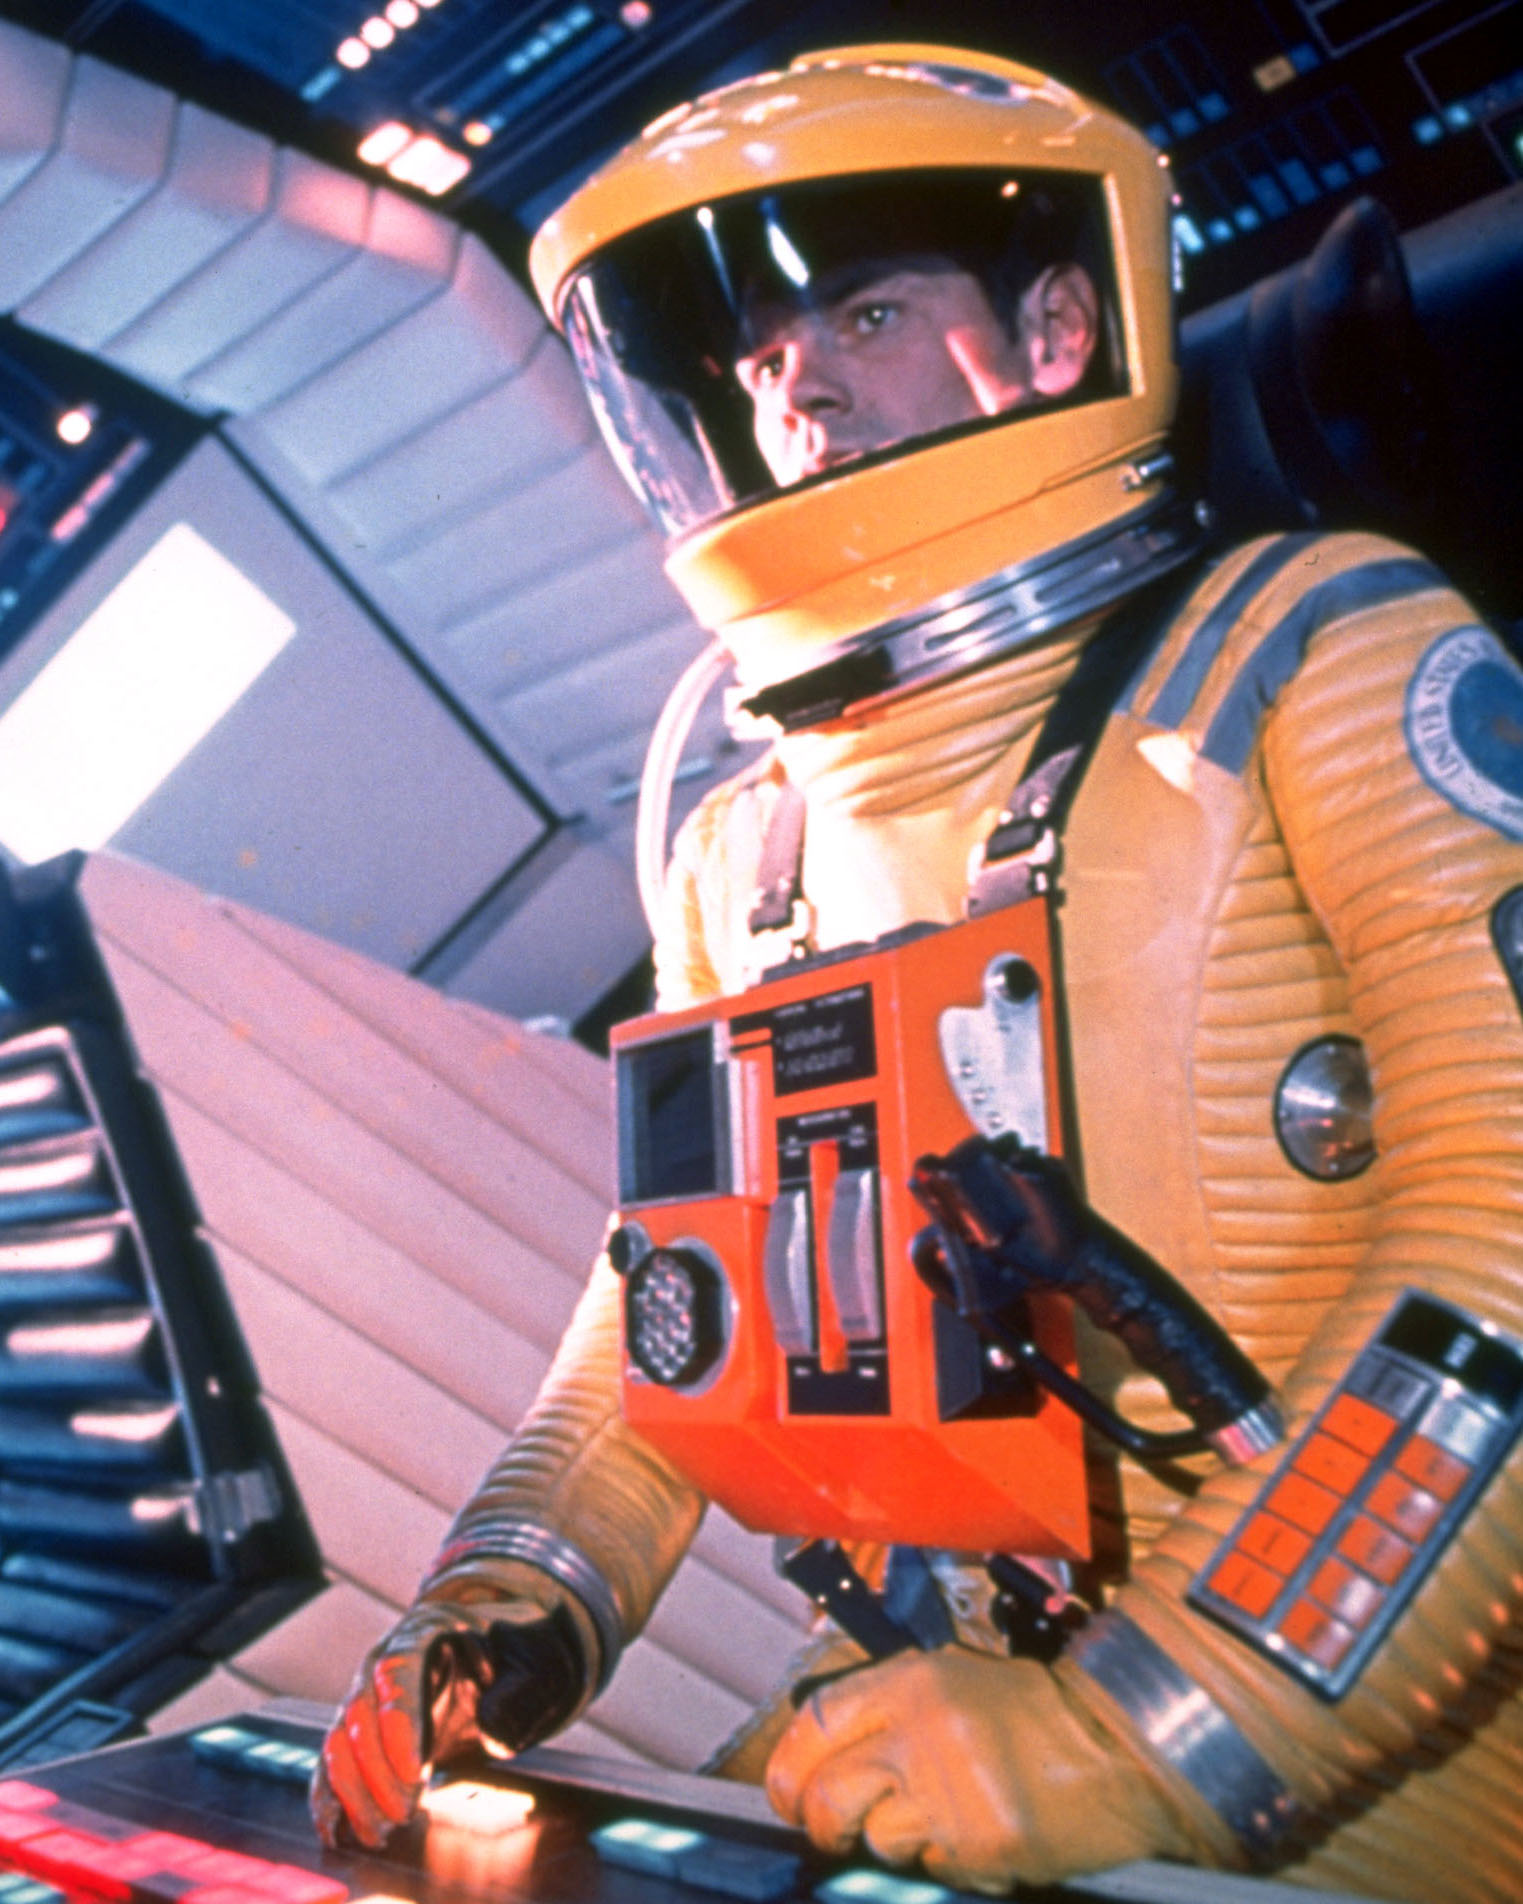 Gary Lockwood in 2001: A Space Odyssey (1968)